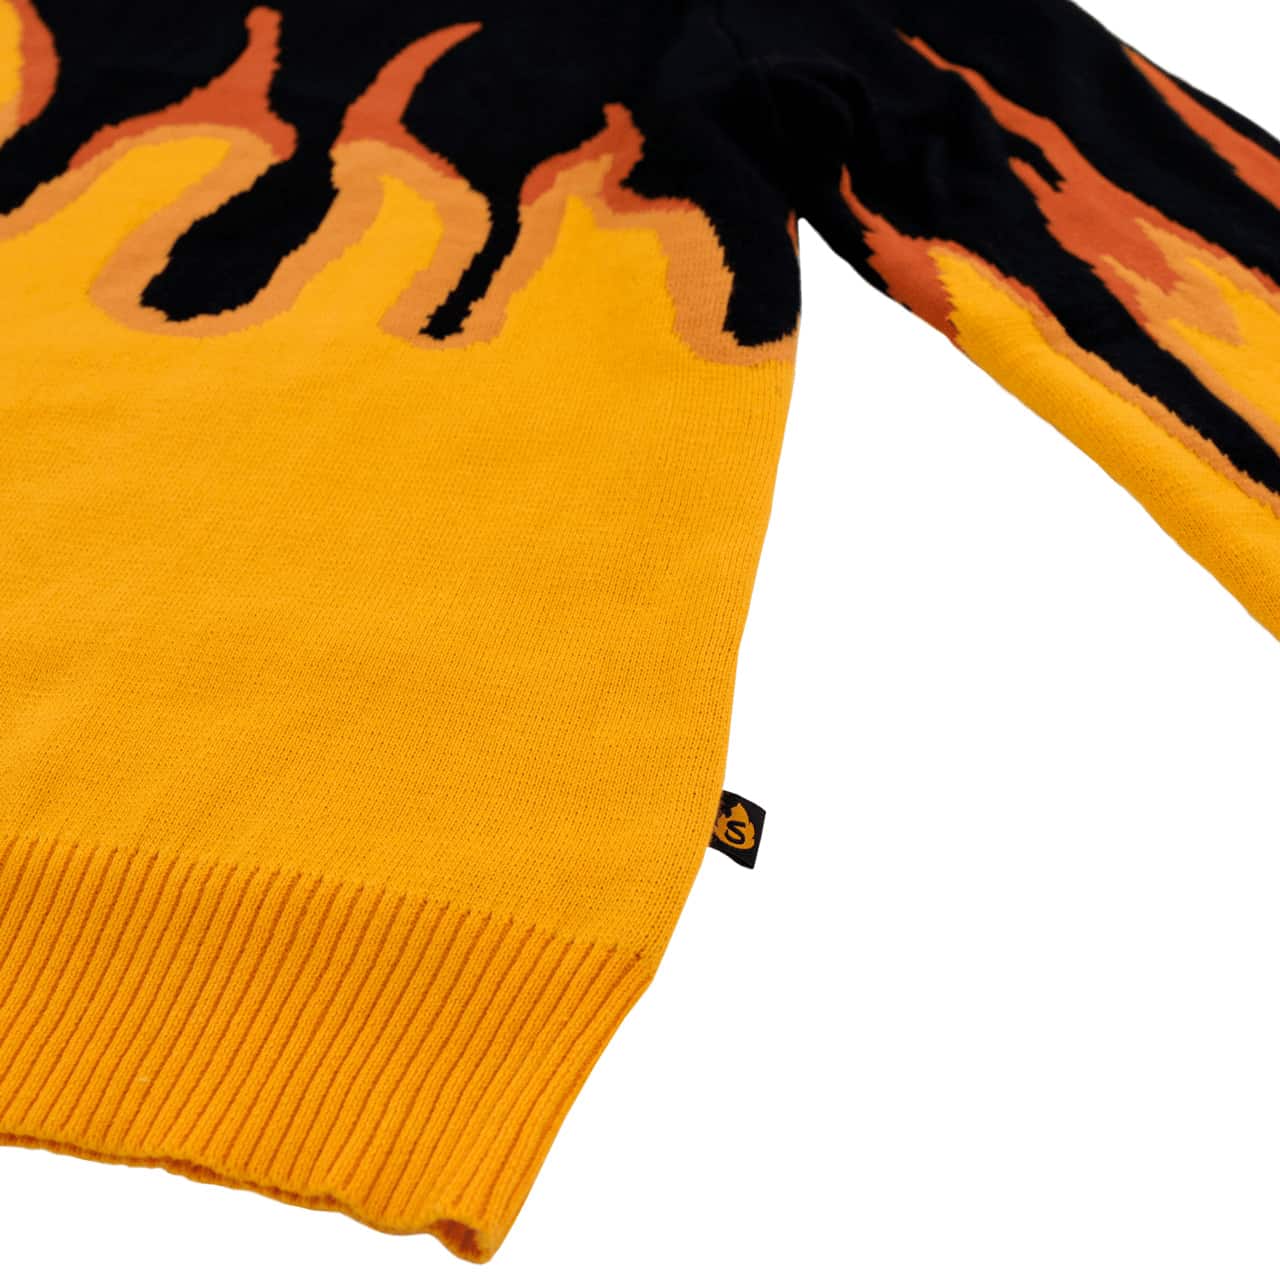 Sapnap Knitted Flame Sweater